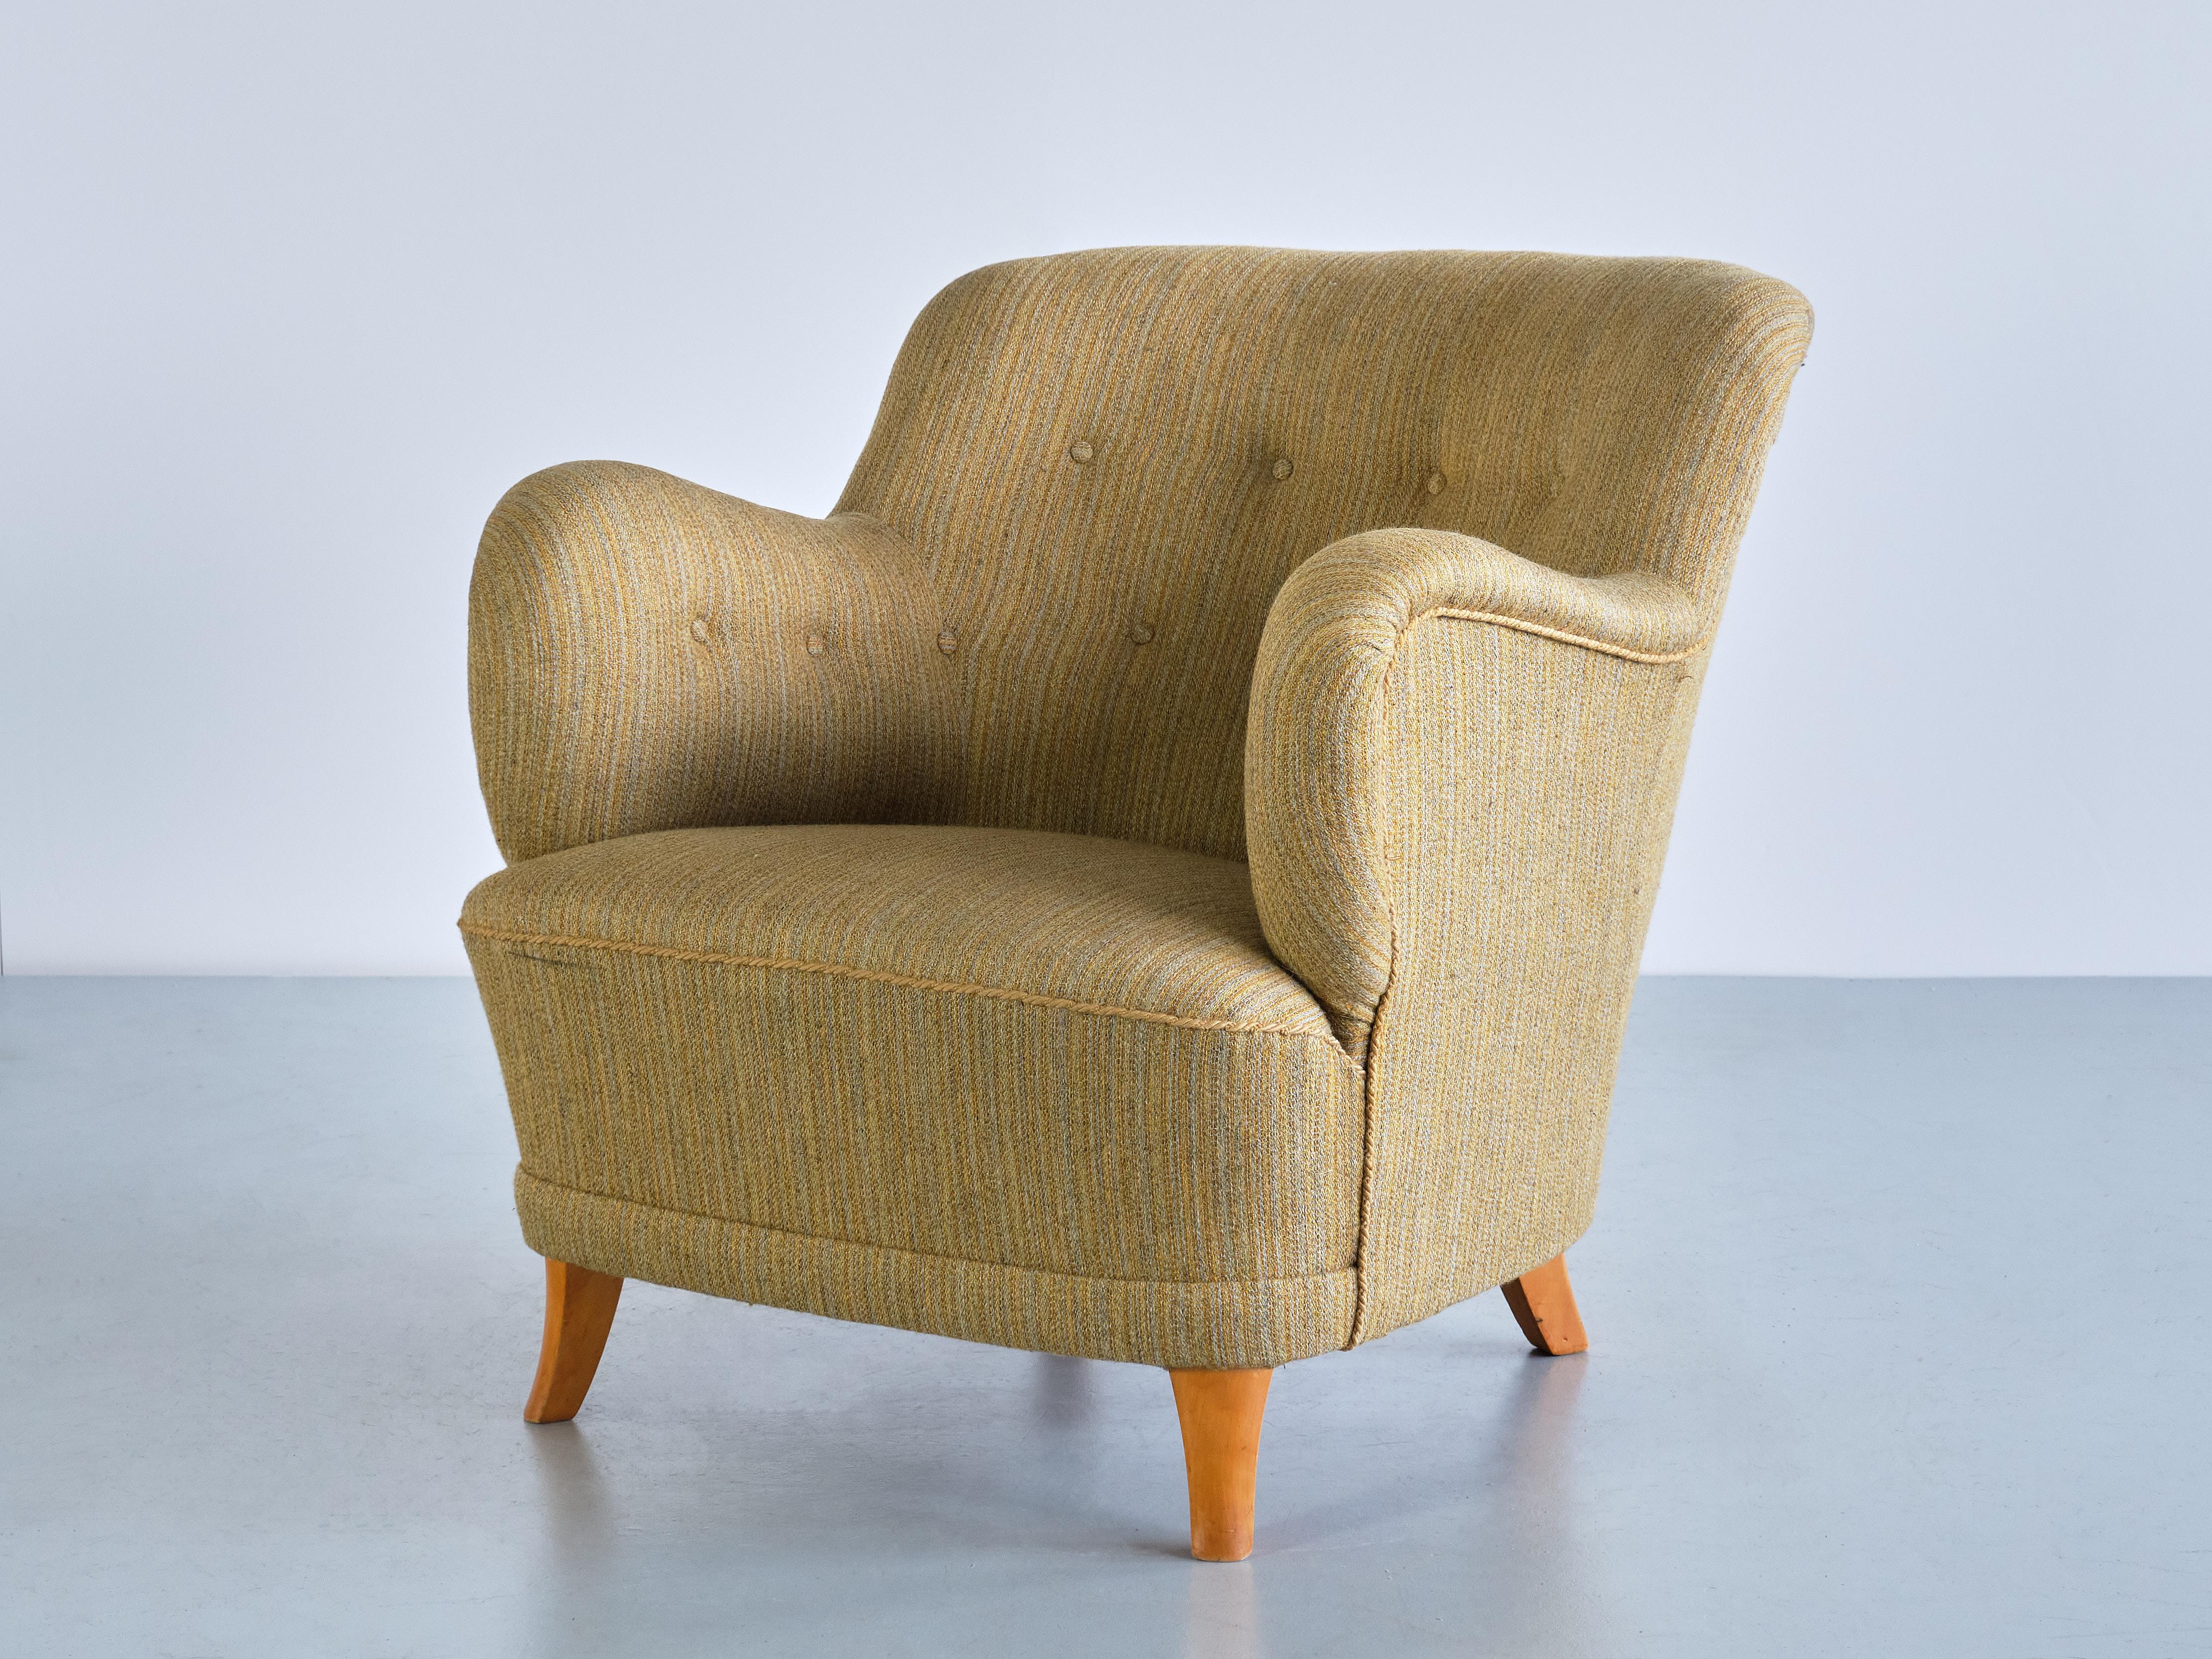 Sculptural Pair of Gustav Axel Berg Armchairs in Beech and Wool, Sweden, 1940s For Sale 4